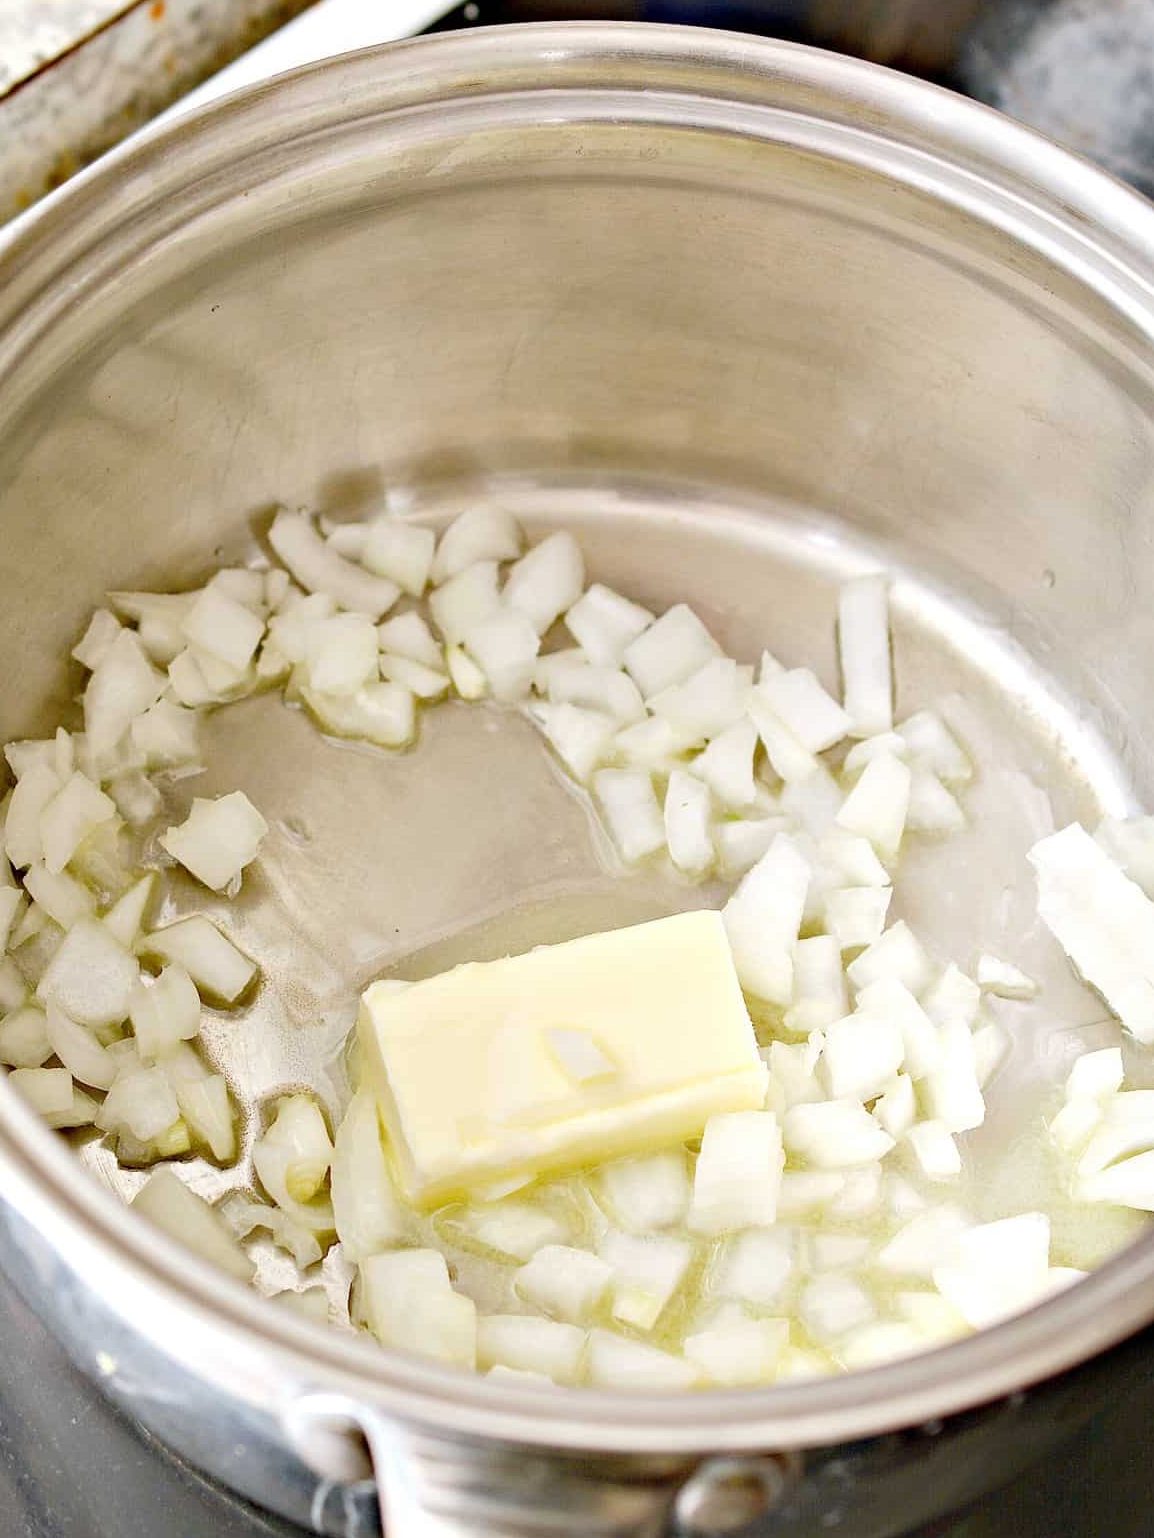 Add the onions to the melted butter, and cook until they begin to soften.